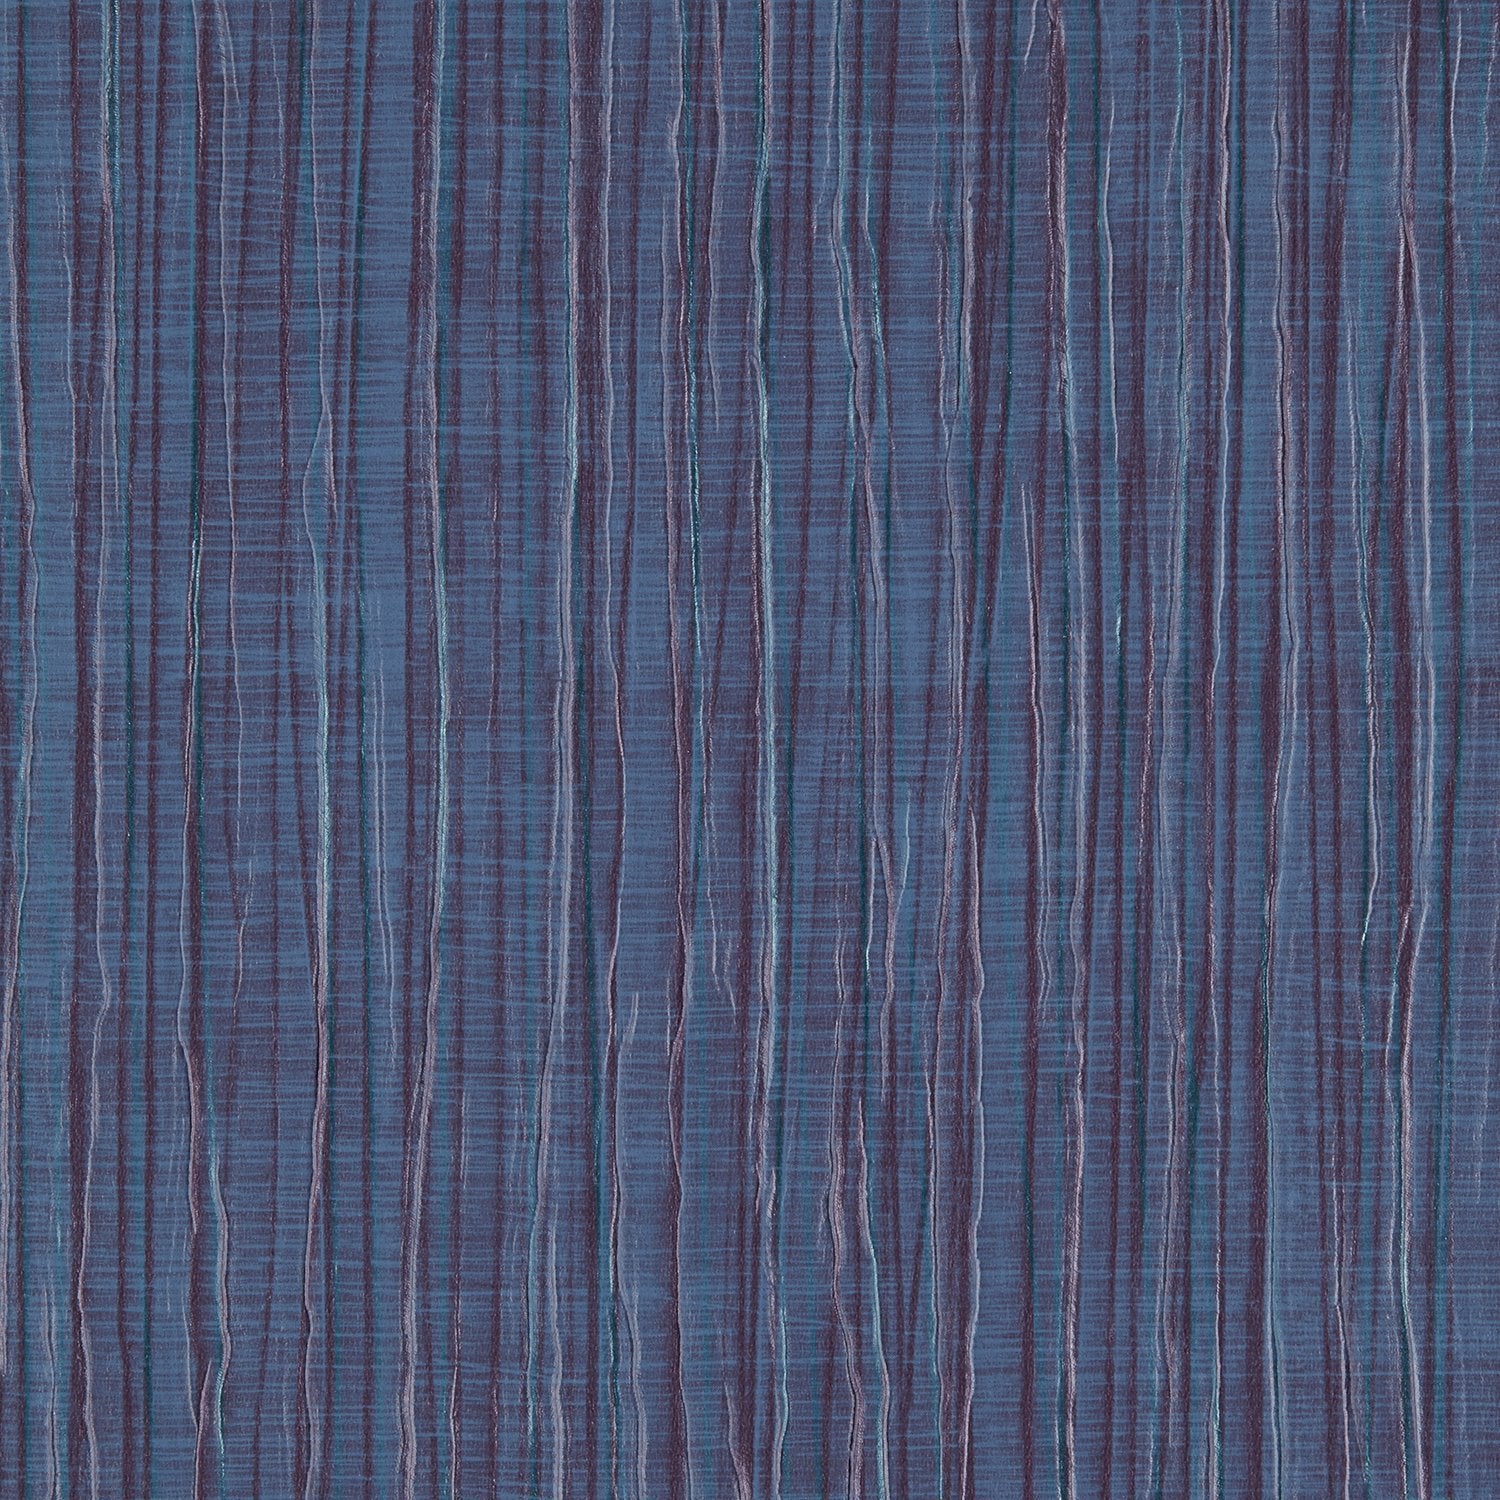 Vogue Pleat - Y47012 - Wallcovering - Vycon - Kube Contract